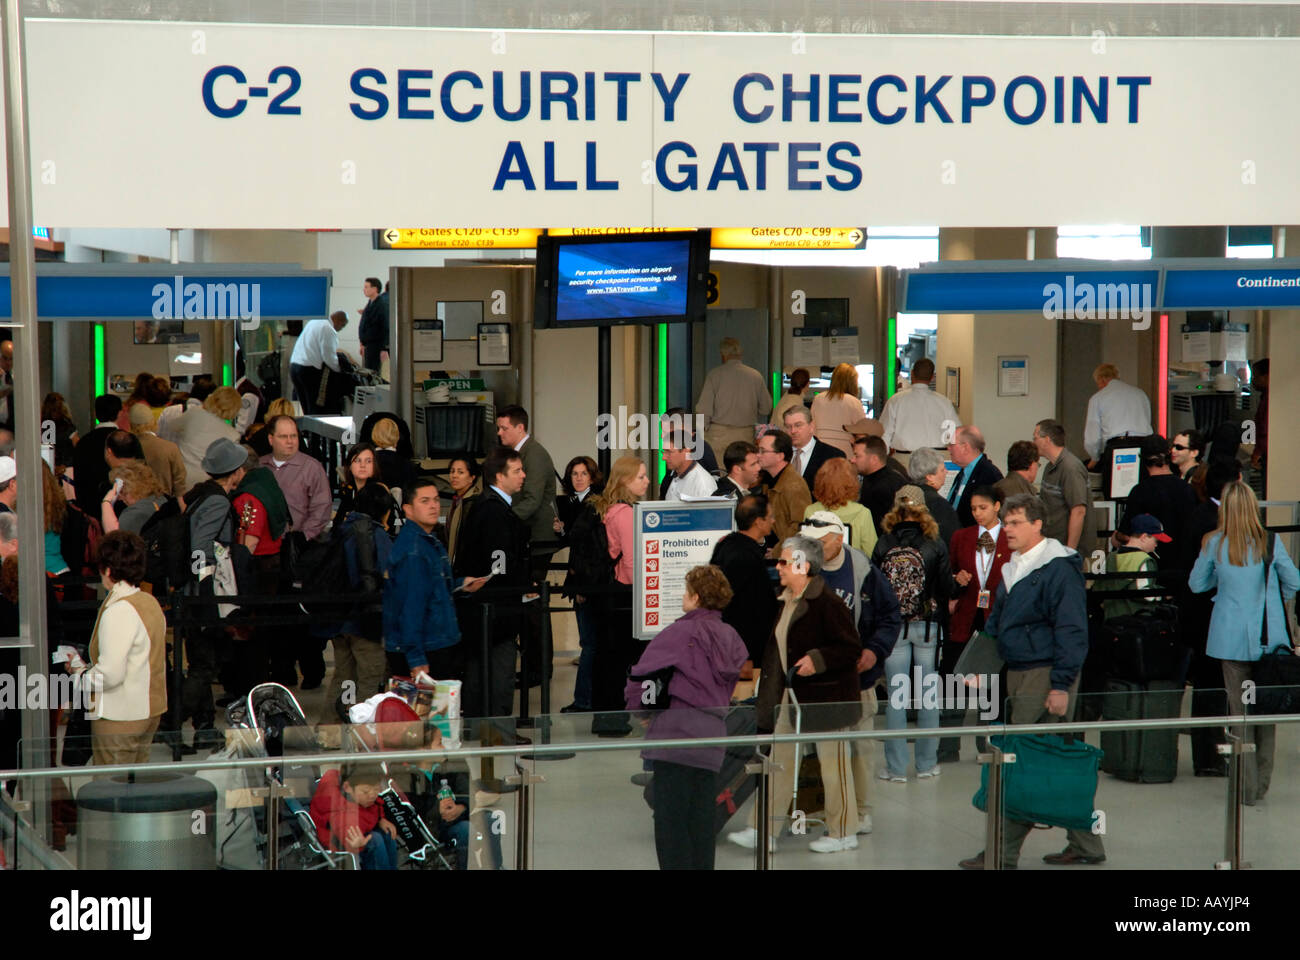 People waiting in line at airport security checkpoint, Newark International Airport, North America Stock Photo